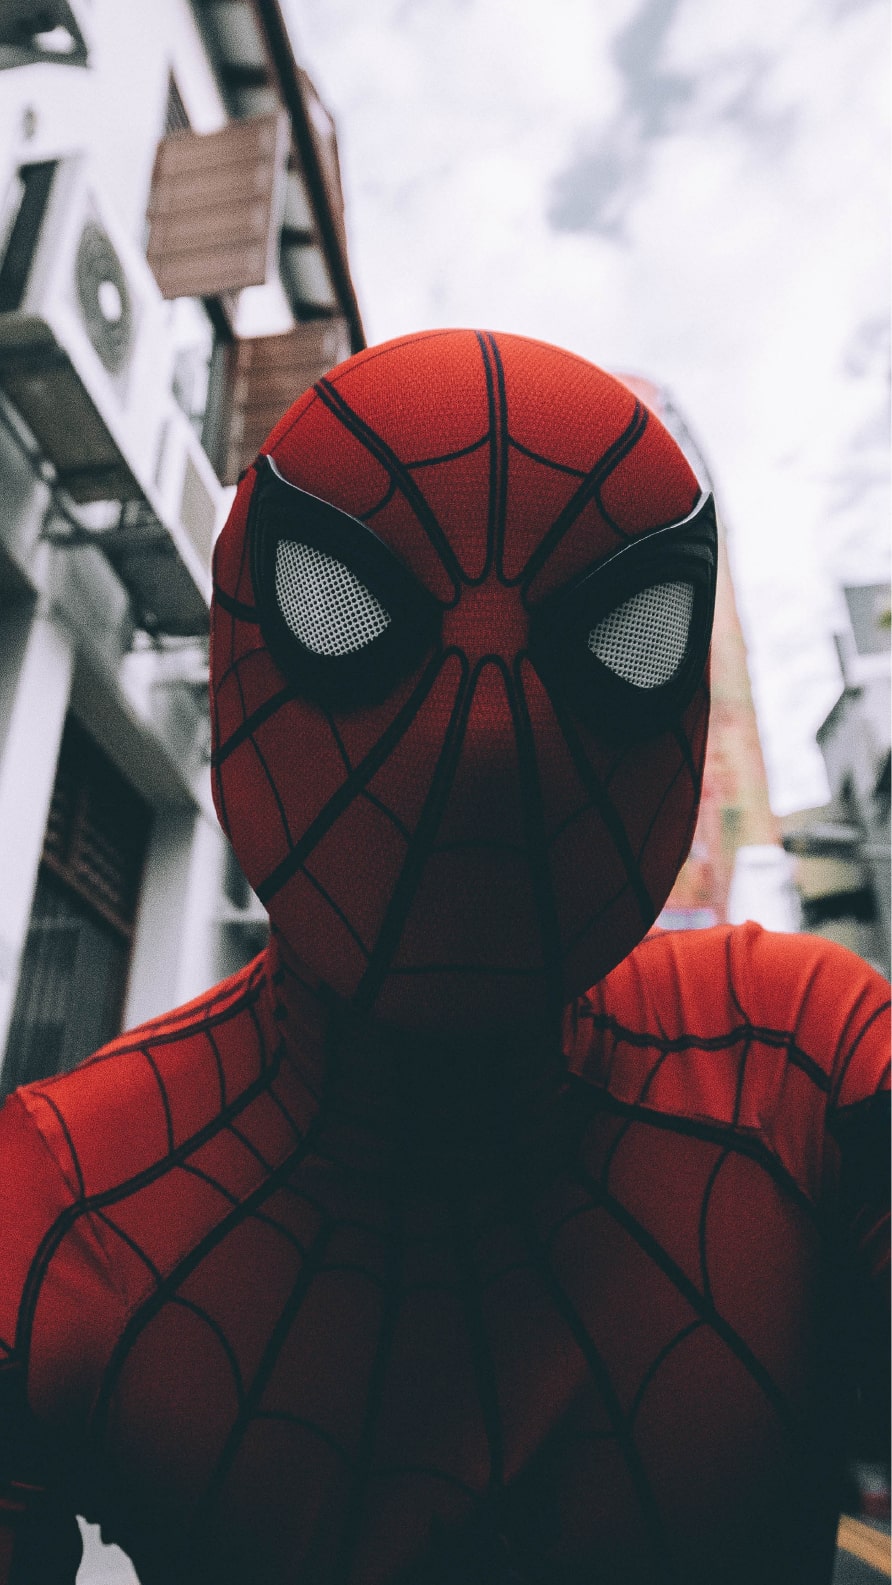 iPhone wallpapers featuring Spider-Man